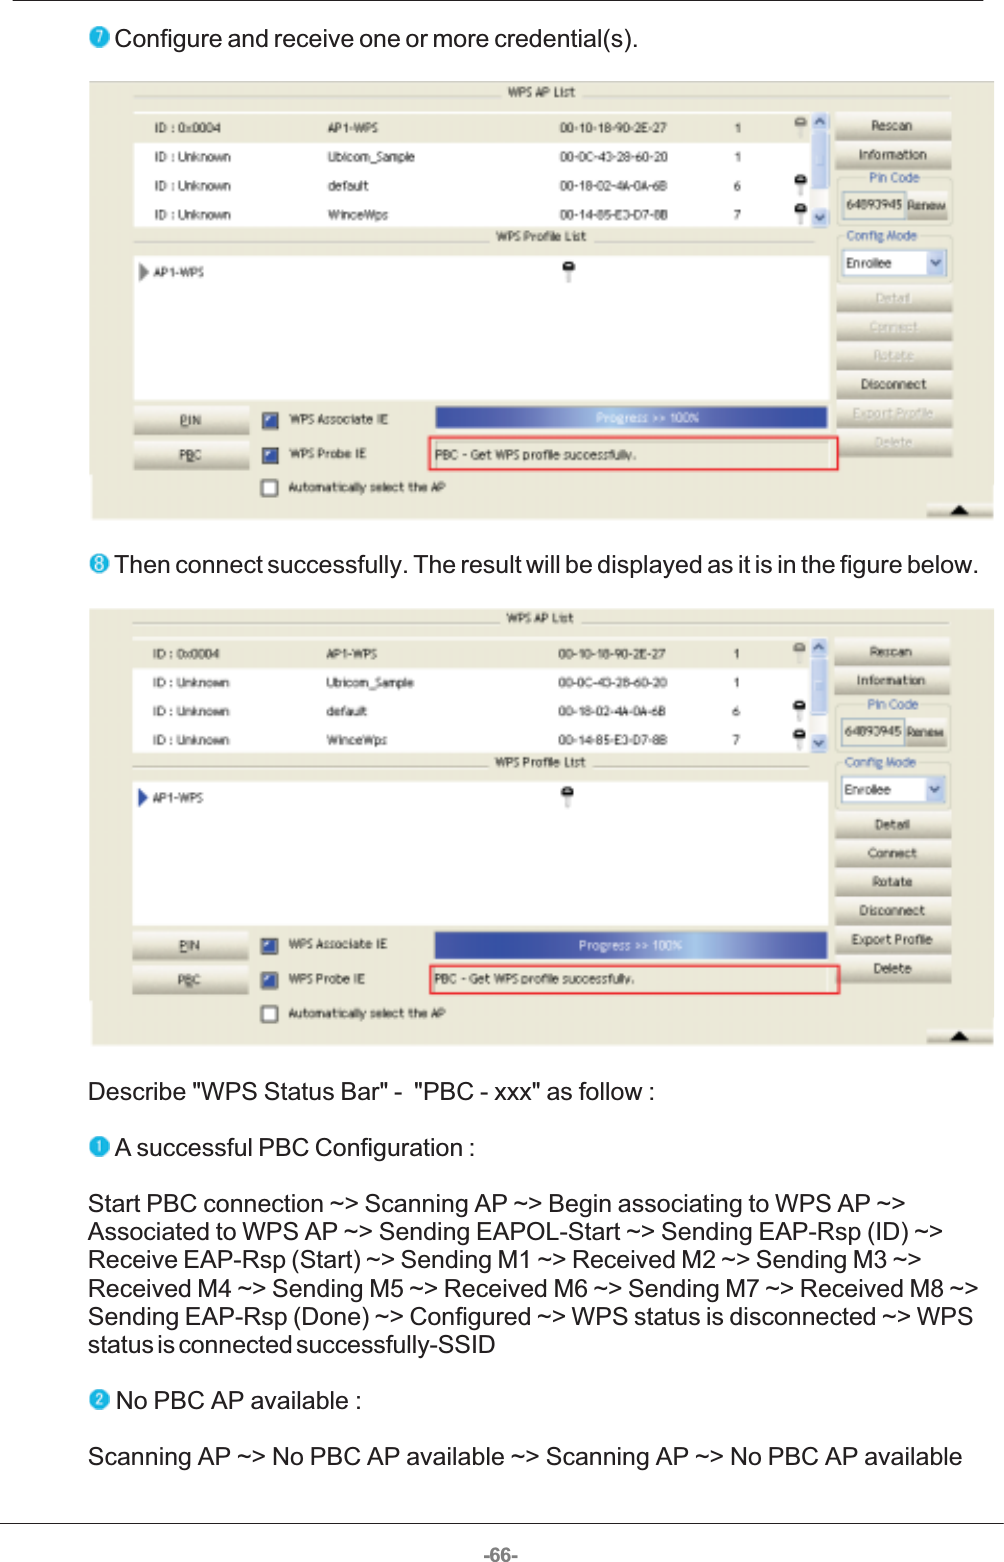 -66- Configure and receive one or more credential(s).   Then connect successfully. The result will be displayed as it is in the figure below.  Describe &quot;WPS Status Bar&quot; -  &quot;PBC - xxx&quot; as follow :  A successful PBC Configuration : Start PBC connection ~&gt; Scanning AP ~&gt; Begin associating to WPS AP ~&gt;Associated to WPS AP ~&gt; Sending EAPOL-Start ~&gt; Sending EAP-Rsp (ID) ~&gt;Receive EAP-Rsp (Start) ~&gt; Sending M1 ~&gt; Received M2 ~&gt; Sending M3 ~&gt;Received M4 ~&gt; Sending M5 ~&gt; Received M6 ~&gt; Sending M7 ~&gt; Received M8 ~&gt;Sending EAP-Rsp (Done) ~&gt; Configured ~&gt; WPS status is disconnected ~&gt; WPSstatus is connected successfully-SSID  No PBC AP available : Scanning AP ~&gt; No PBC AP available ~&gt; Scanning AP ~&gt; No PBC AP available